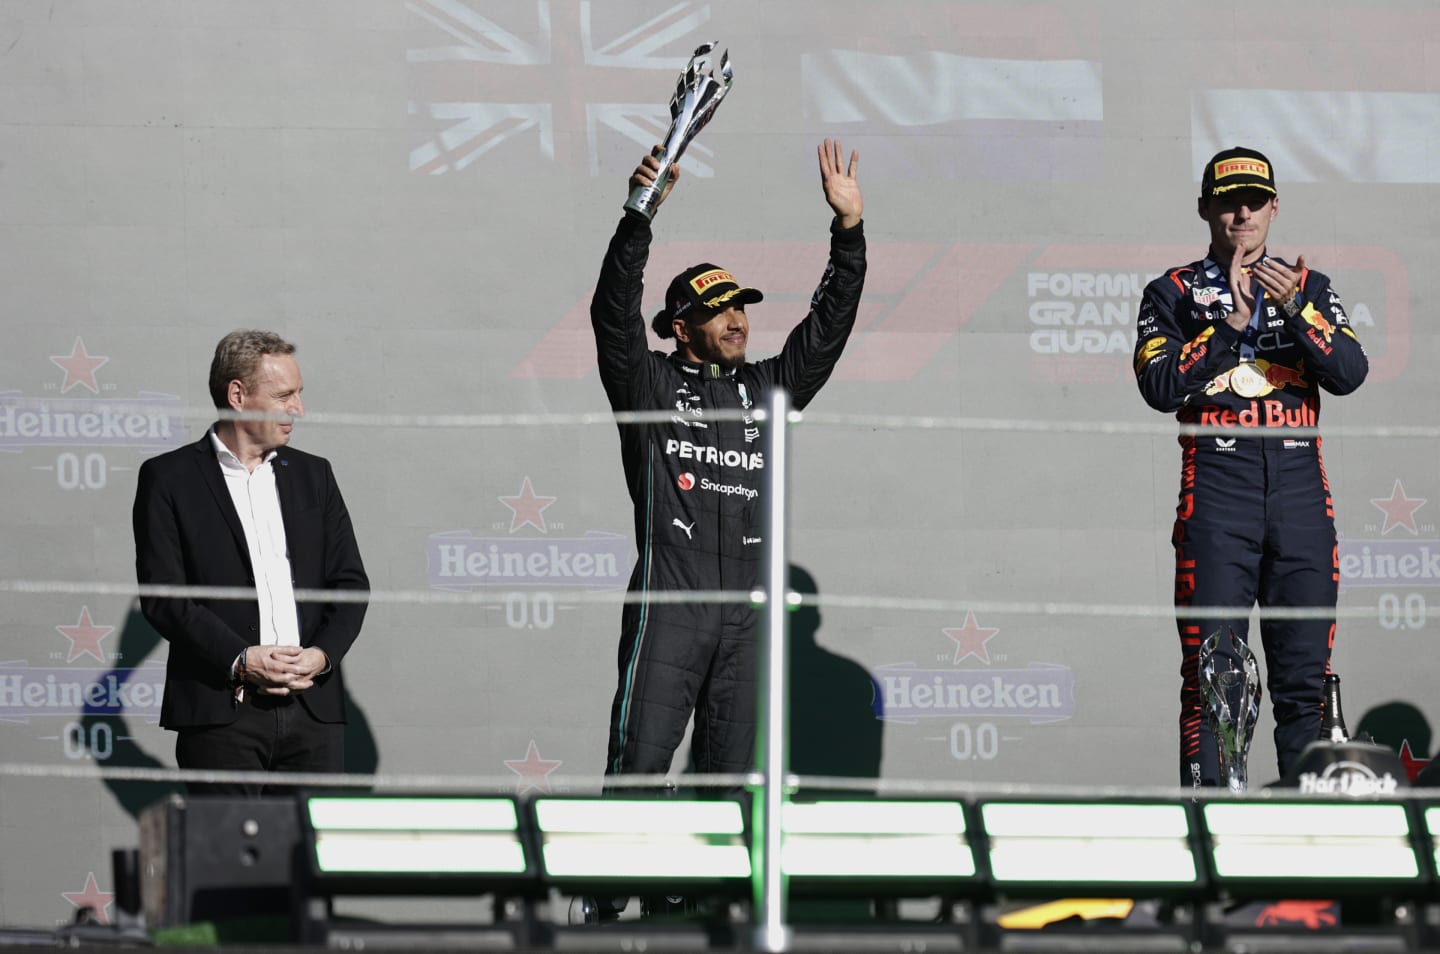 Awards of the Mexico City Grand Prix at the Autodromo Hnos. Rodriguez, where Max Verstappen, Red